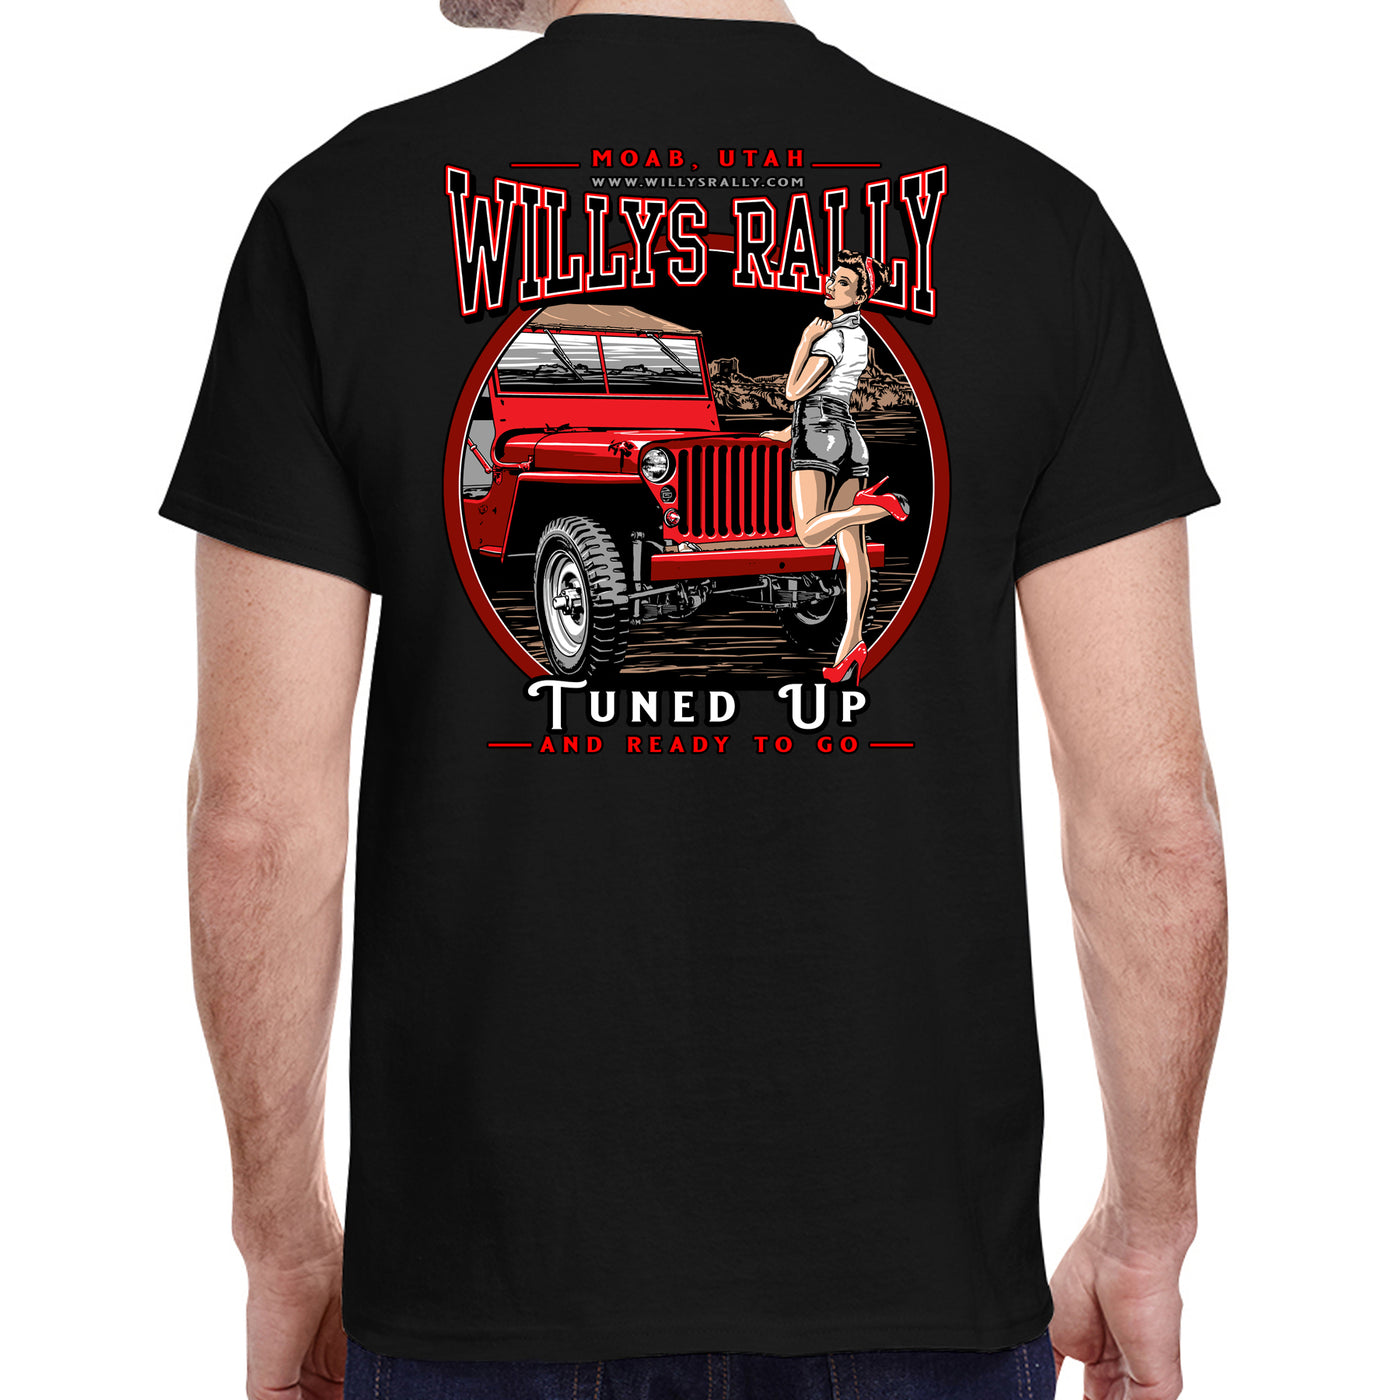 Willys Rally Pin Up Tee